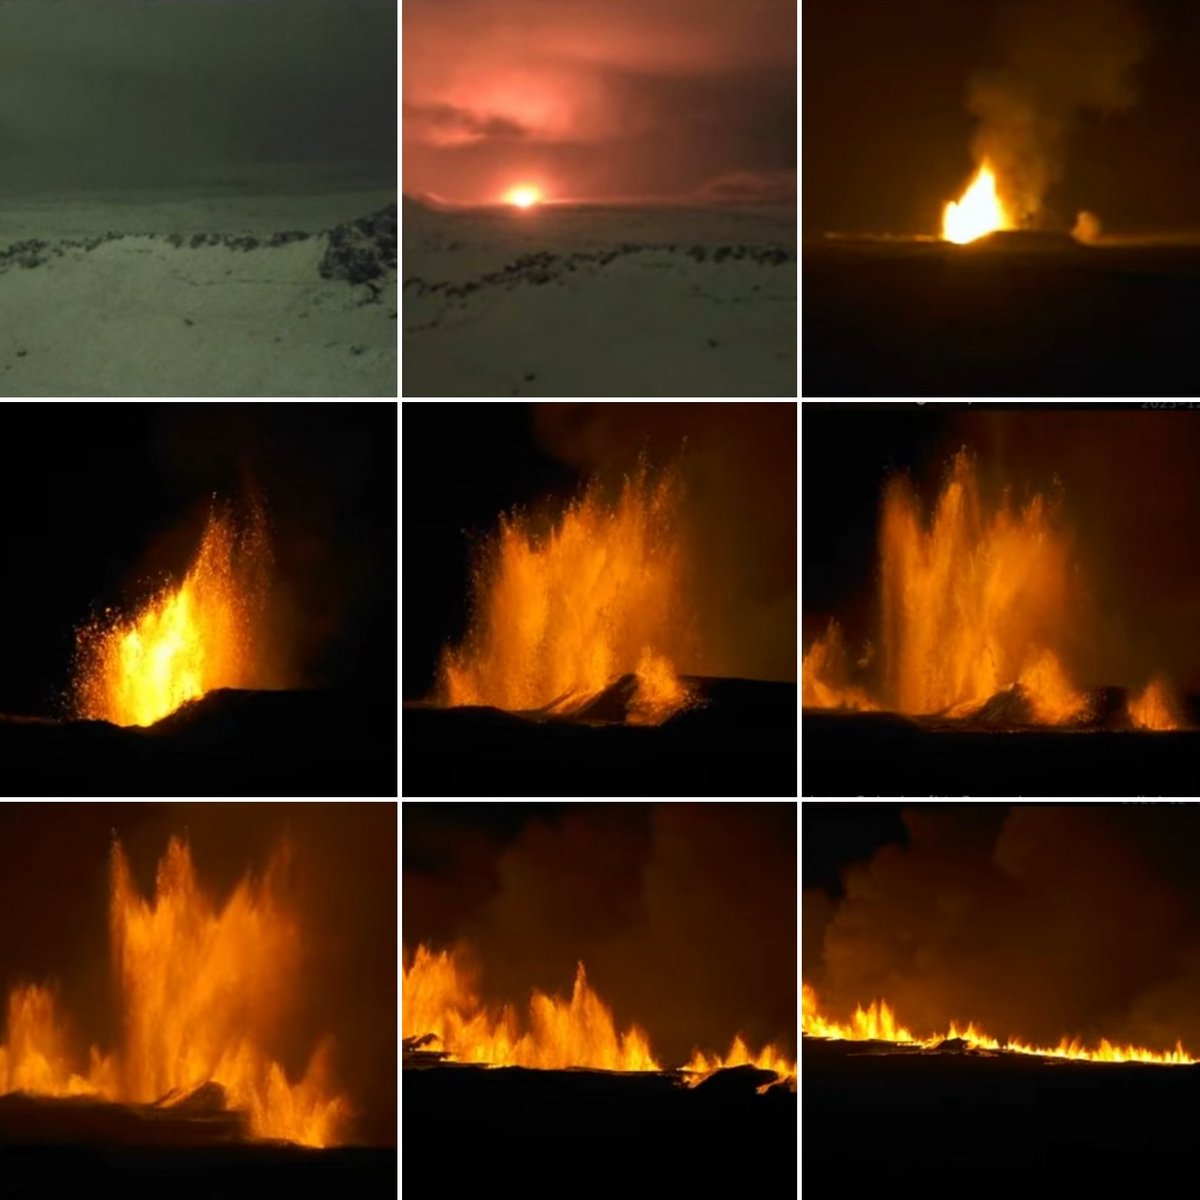 Snapshots over the first 50 minutes of the Iceland eruption from the public webcam. Link below: (NOTE: the camera view zooms out towards the end as the length of the fissure and number of vents grows ). youtube.com/live/804nPrAUA…